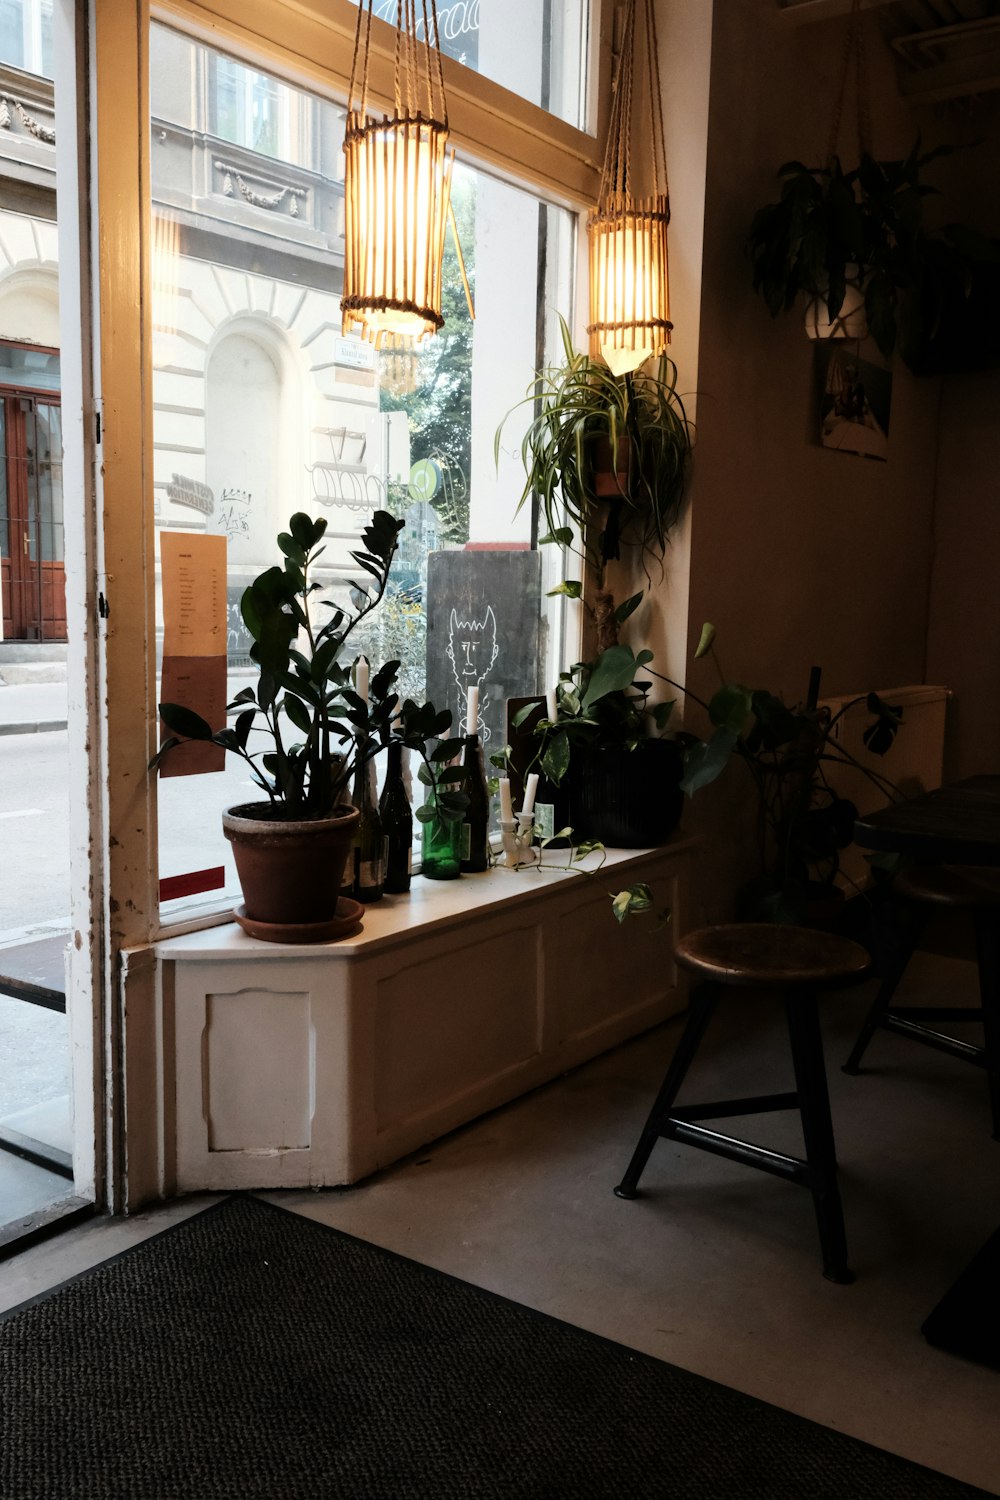 a window sill filled with potted plants in front of a window